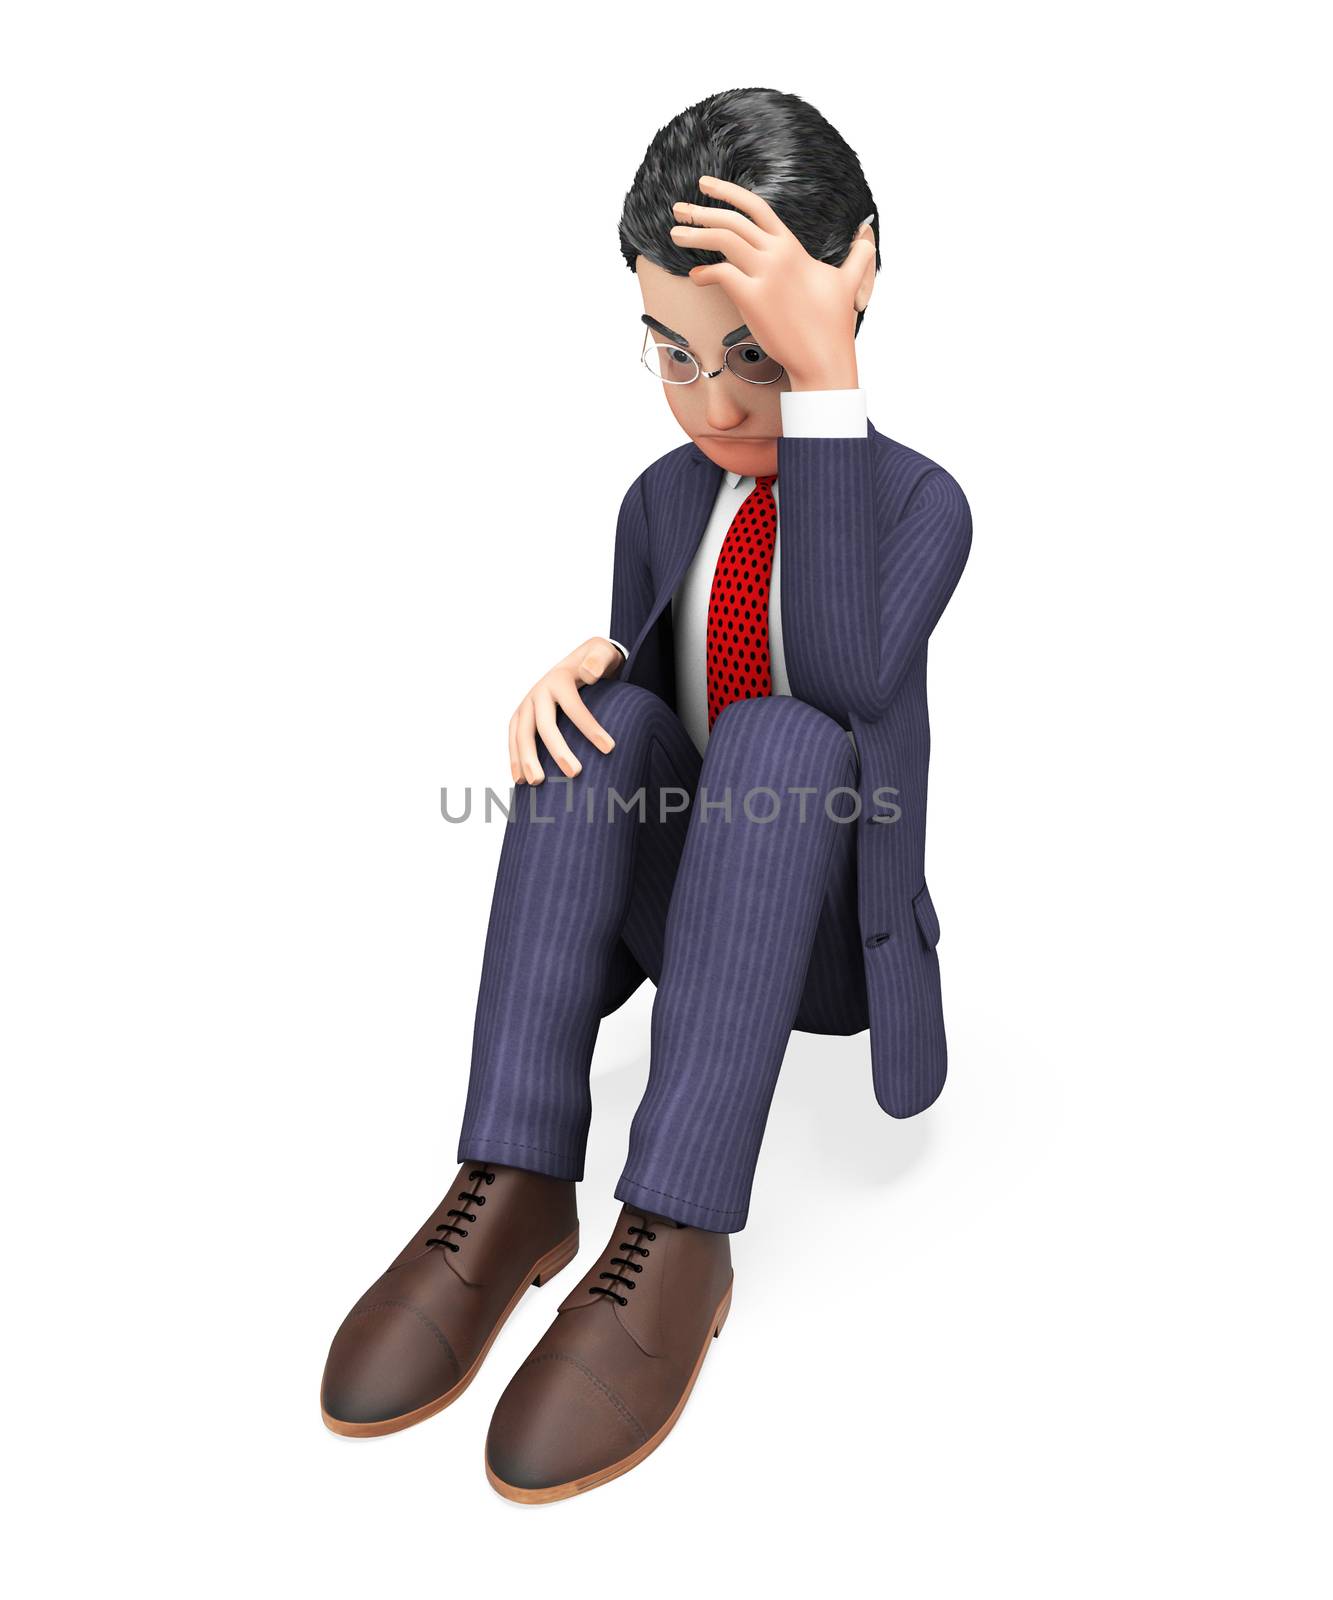 Businessman With Problems Meaning Difficult Situation And Snag